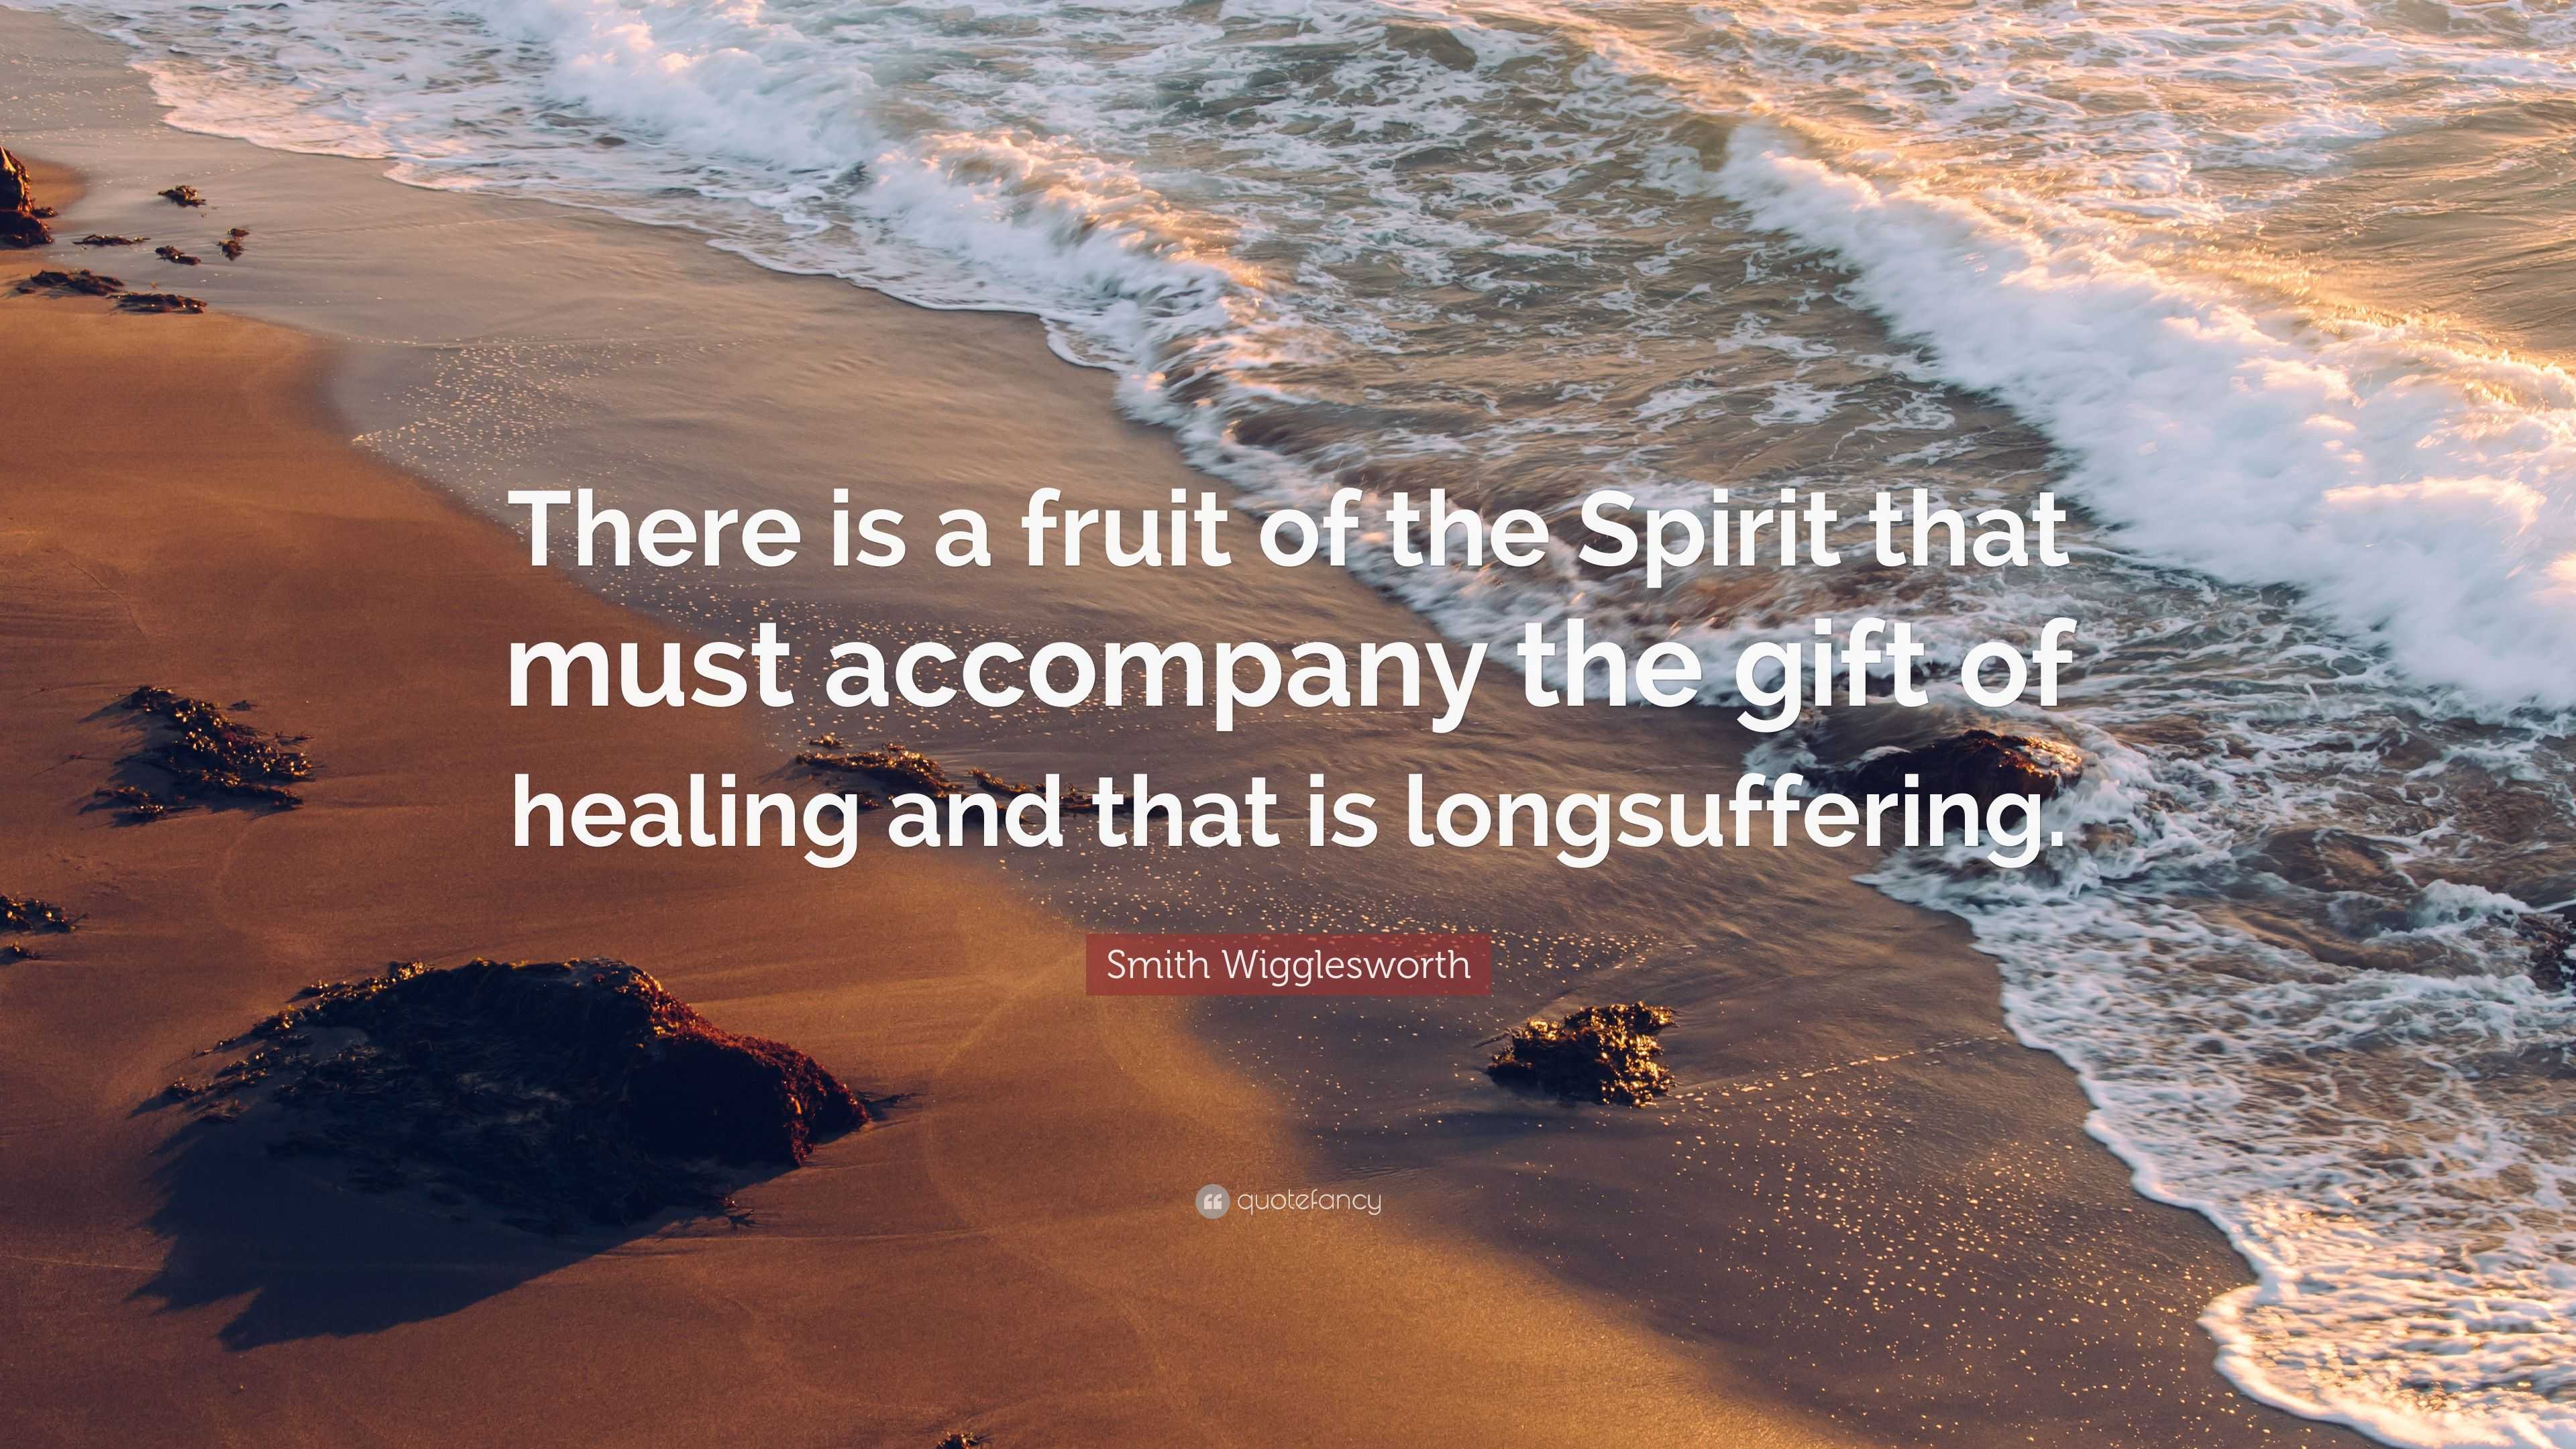 2442893 Smith Wigglesworth Quote There is a fruit of the Spirit that must